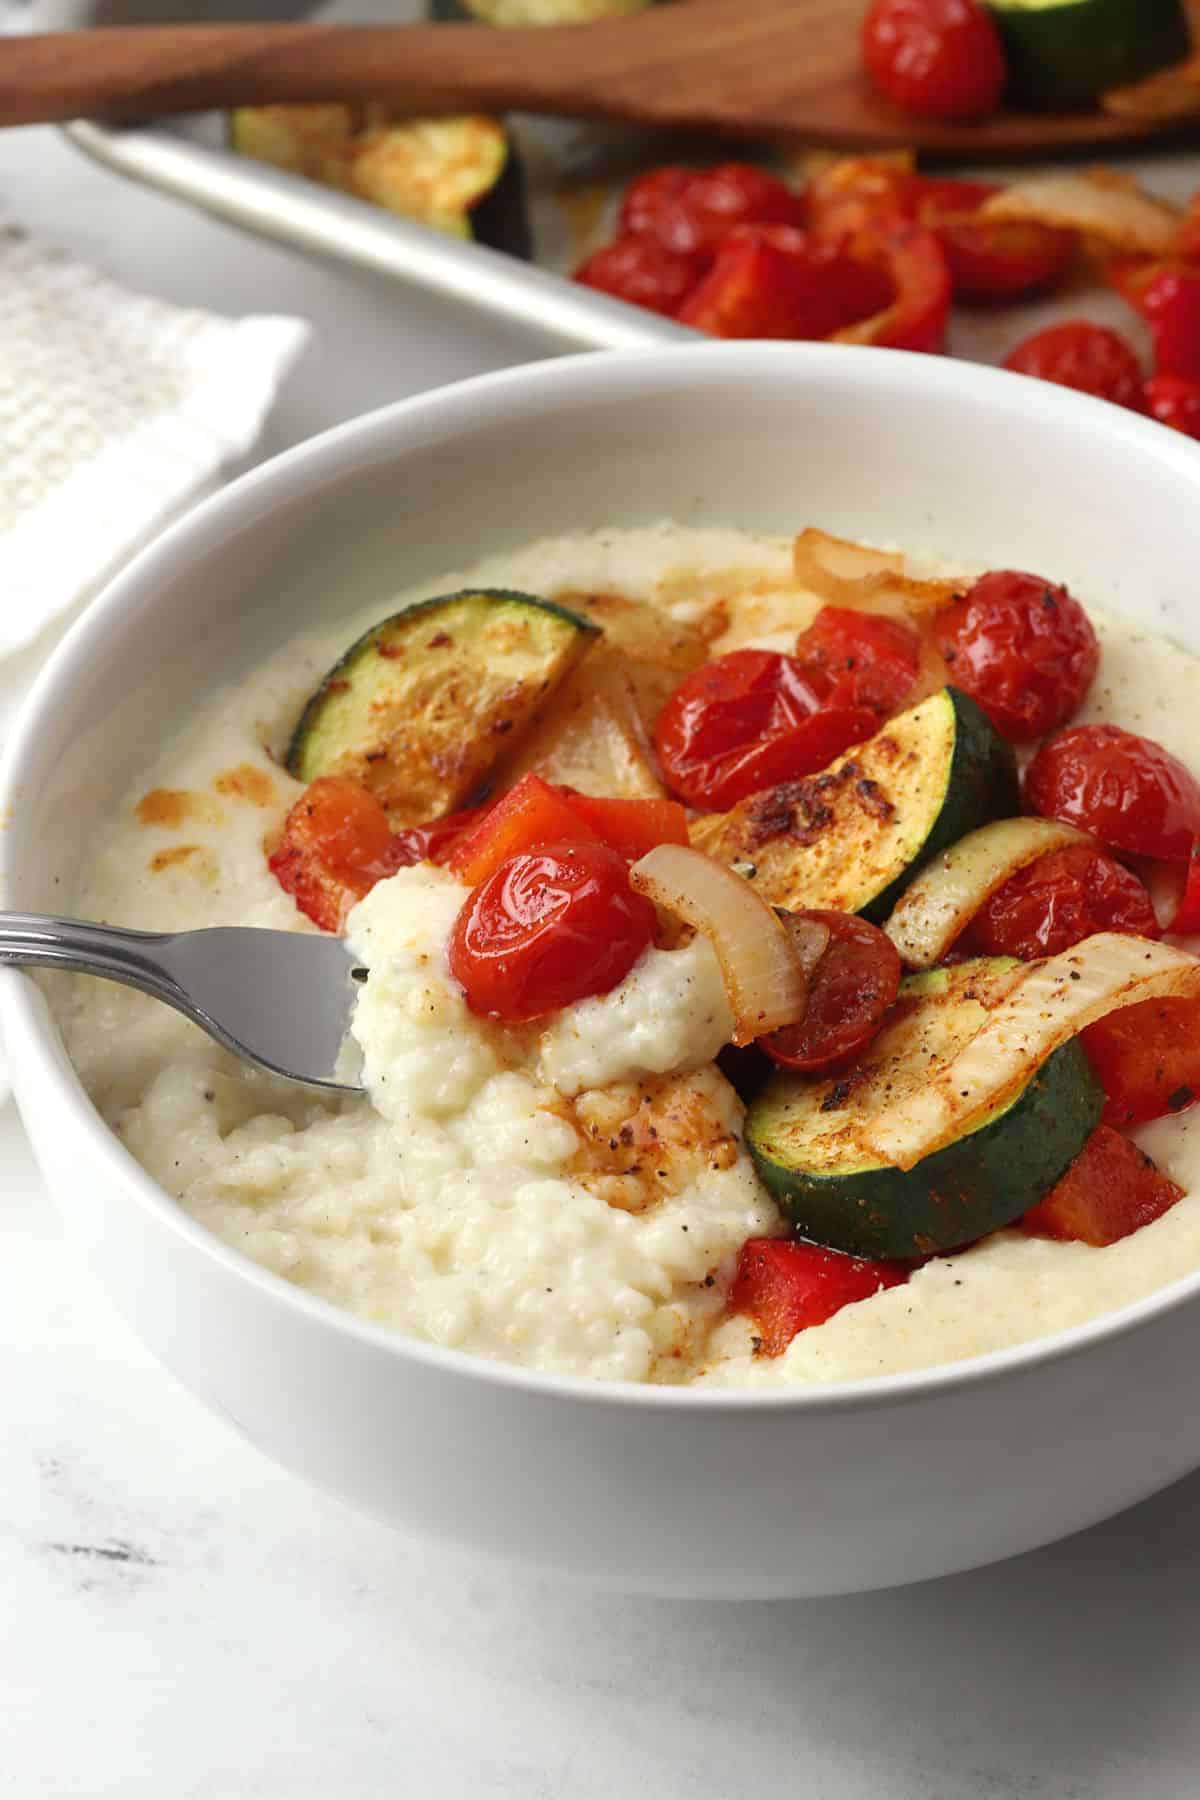 A fork in a bowl of creamy grits and roasted vegetables.